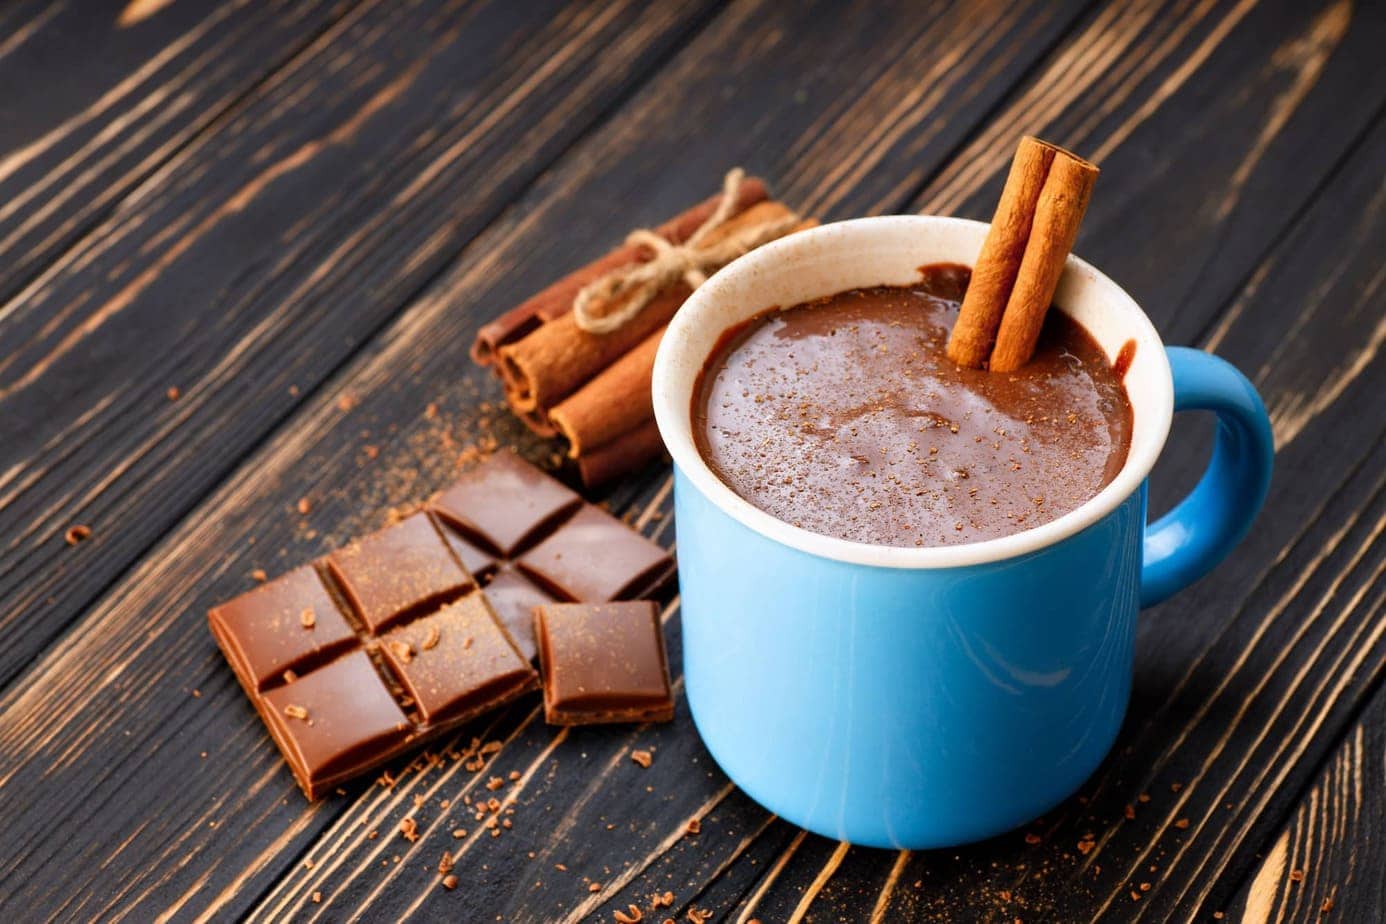 Revolutionize Your Hot Cocoa Experience: Make It in Your Coffee Maker